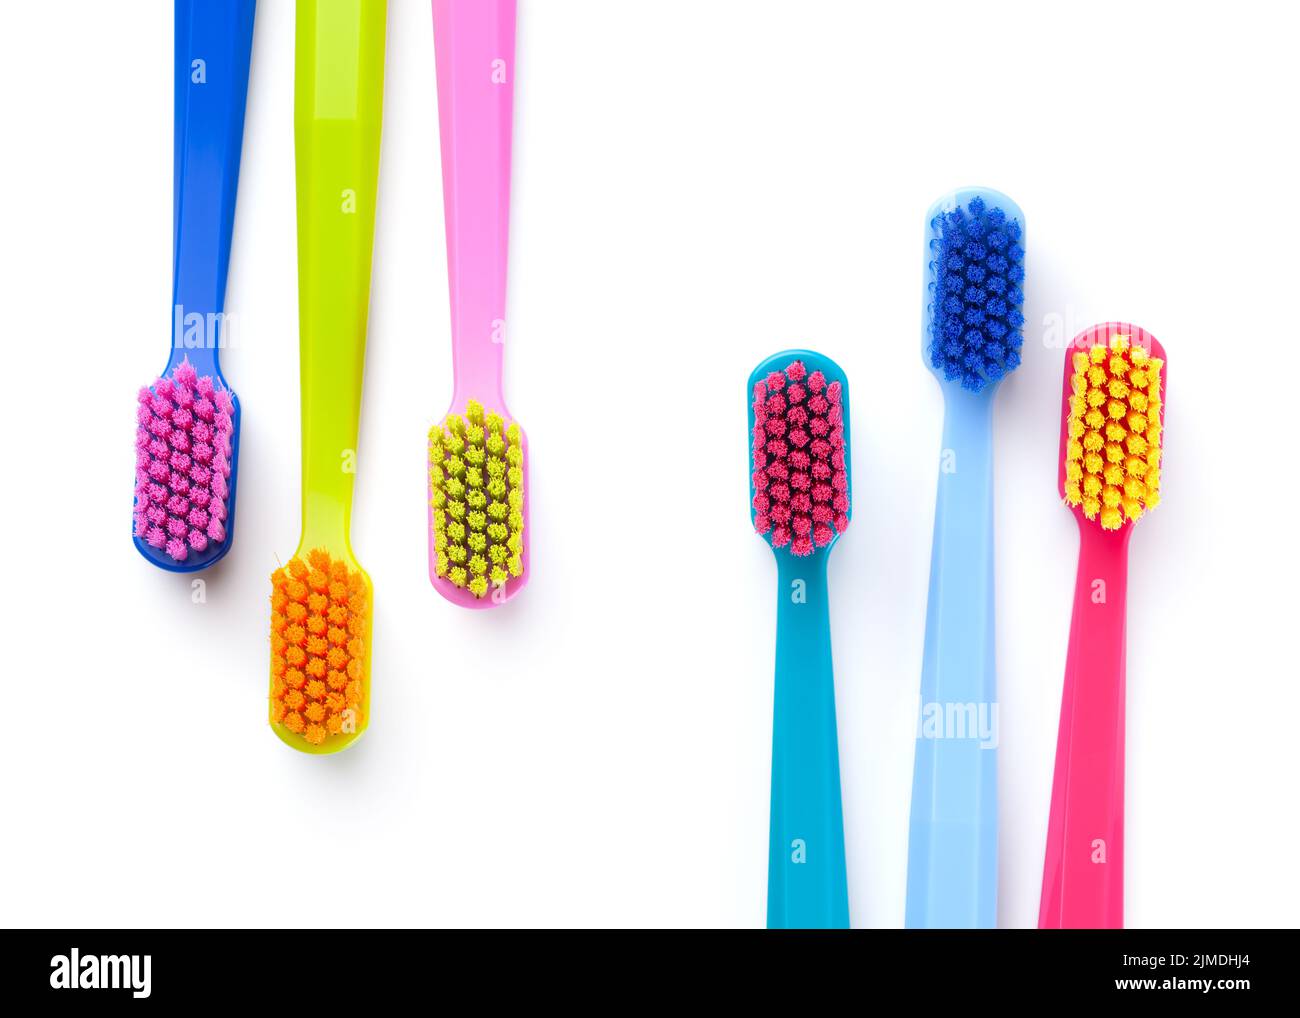 Colorful New Toothbrushes Isolated On White Background Stock Photo